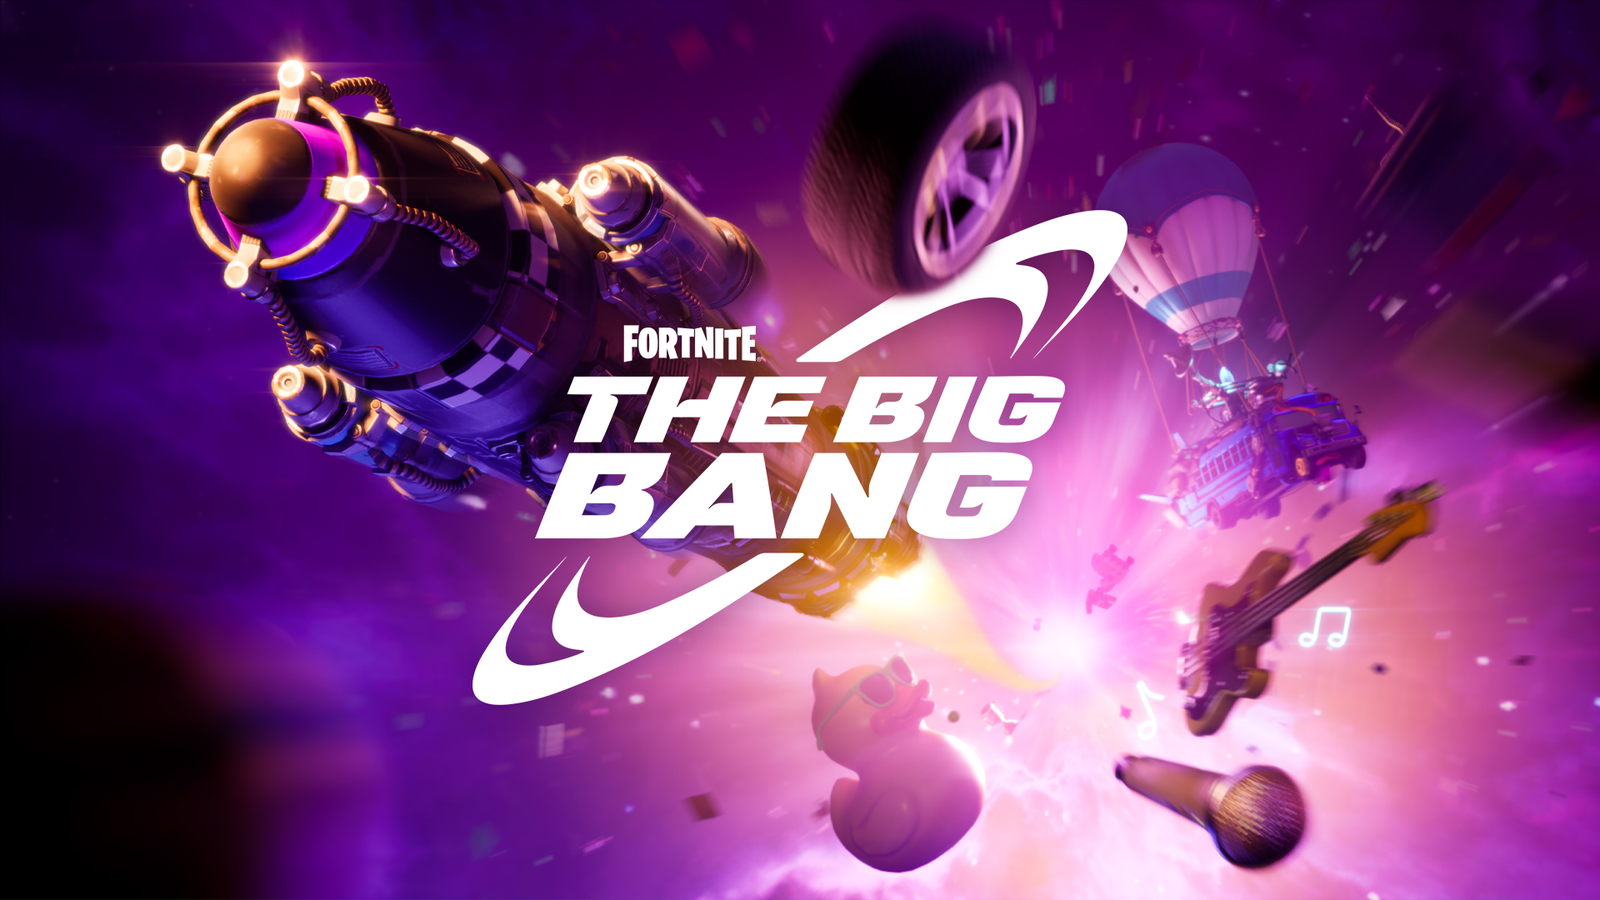 Fortnite dates The Big Bang live event, as leaks suggest a huge music star will appear - Eurogamer.net (Picture 3)